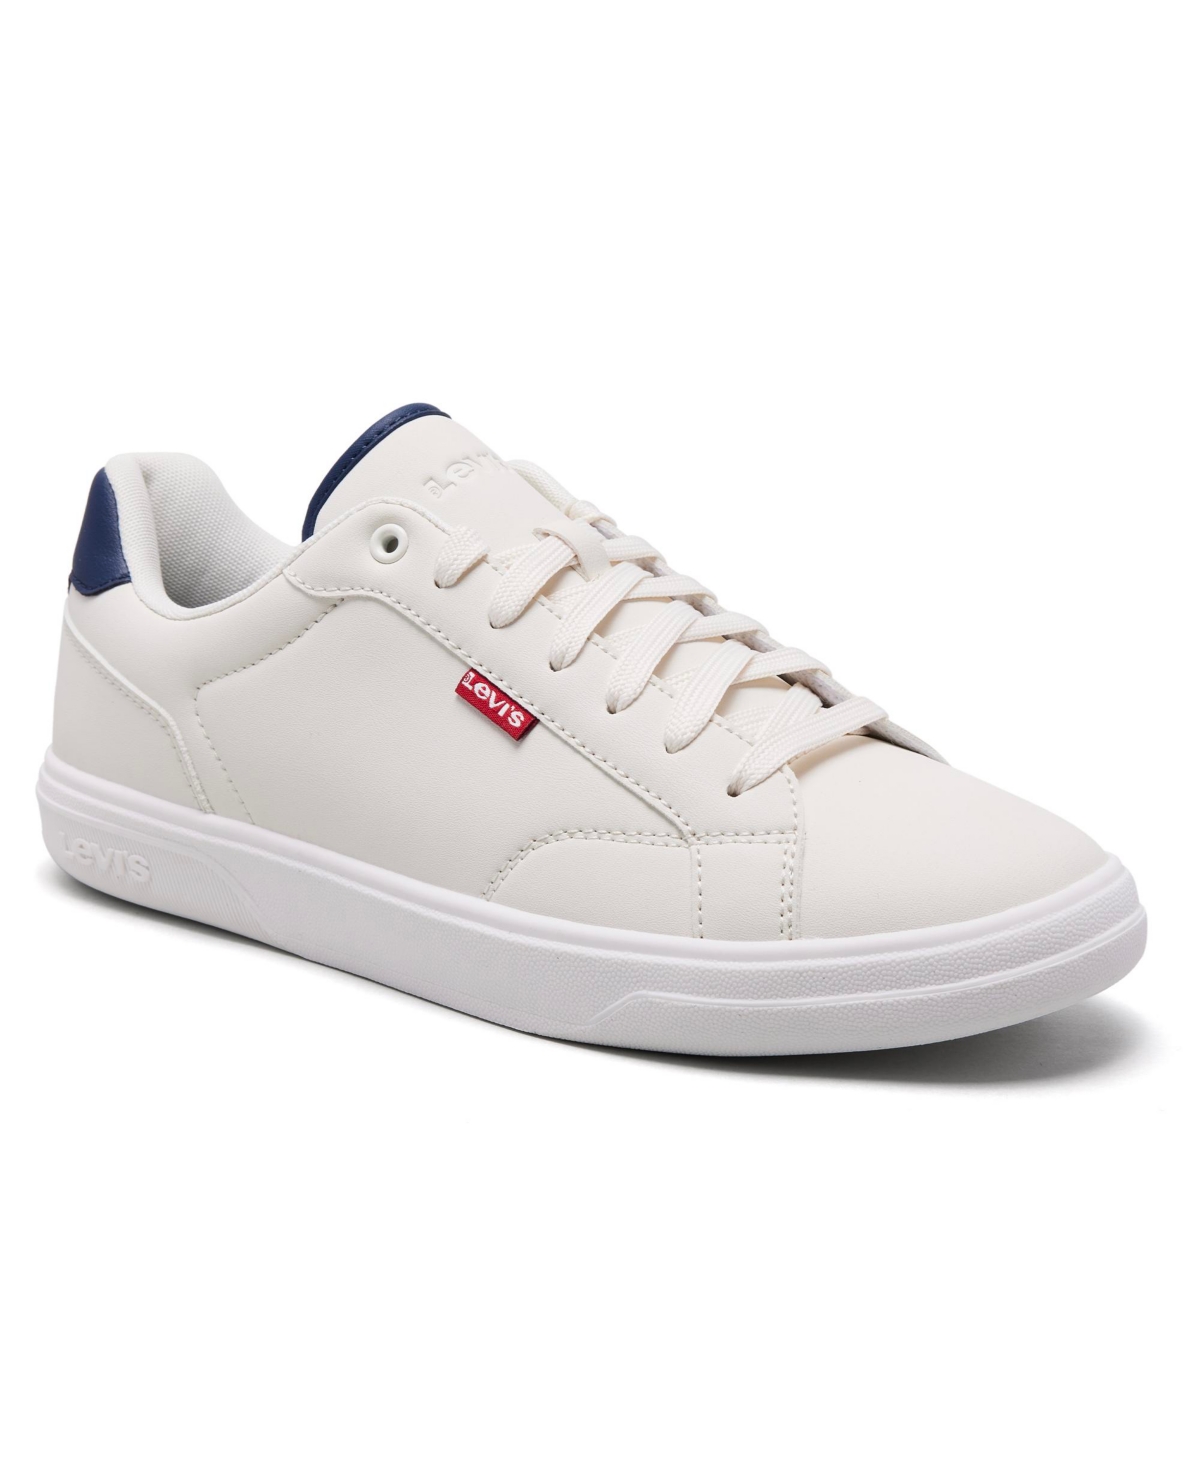 Men's Carter Casual Lace Up Sneakers - White, Navy